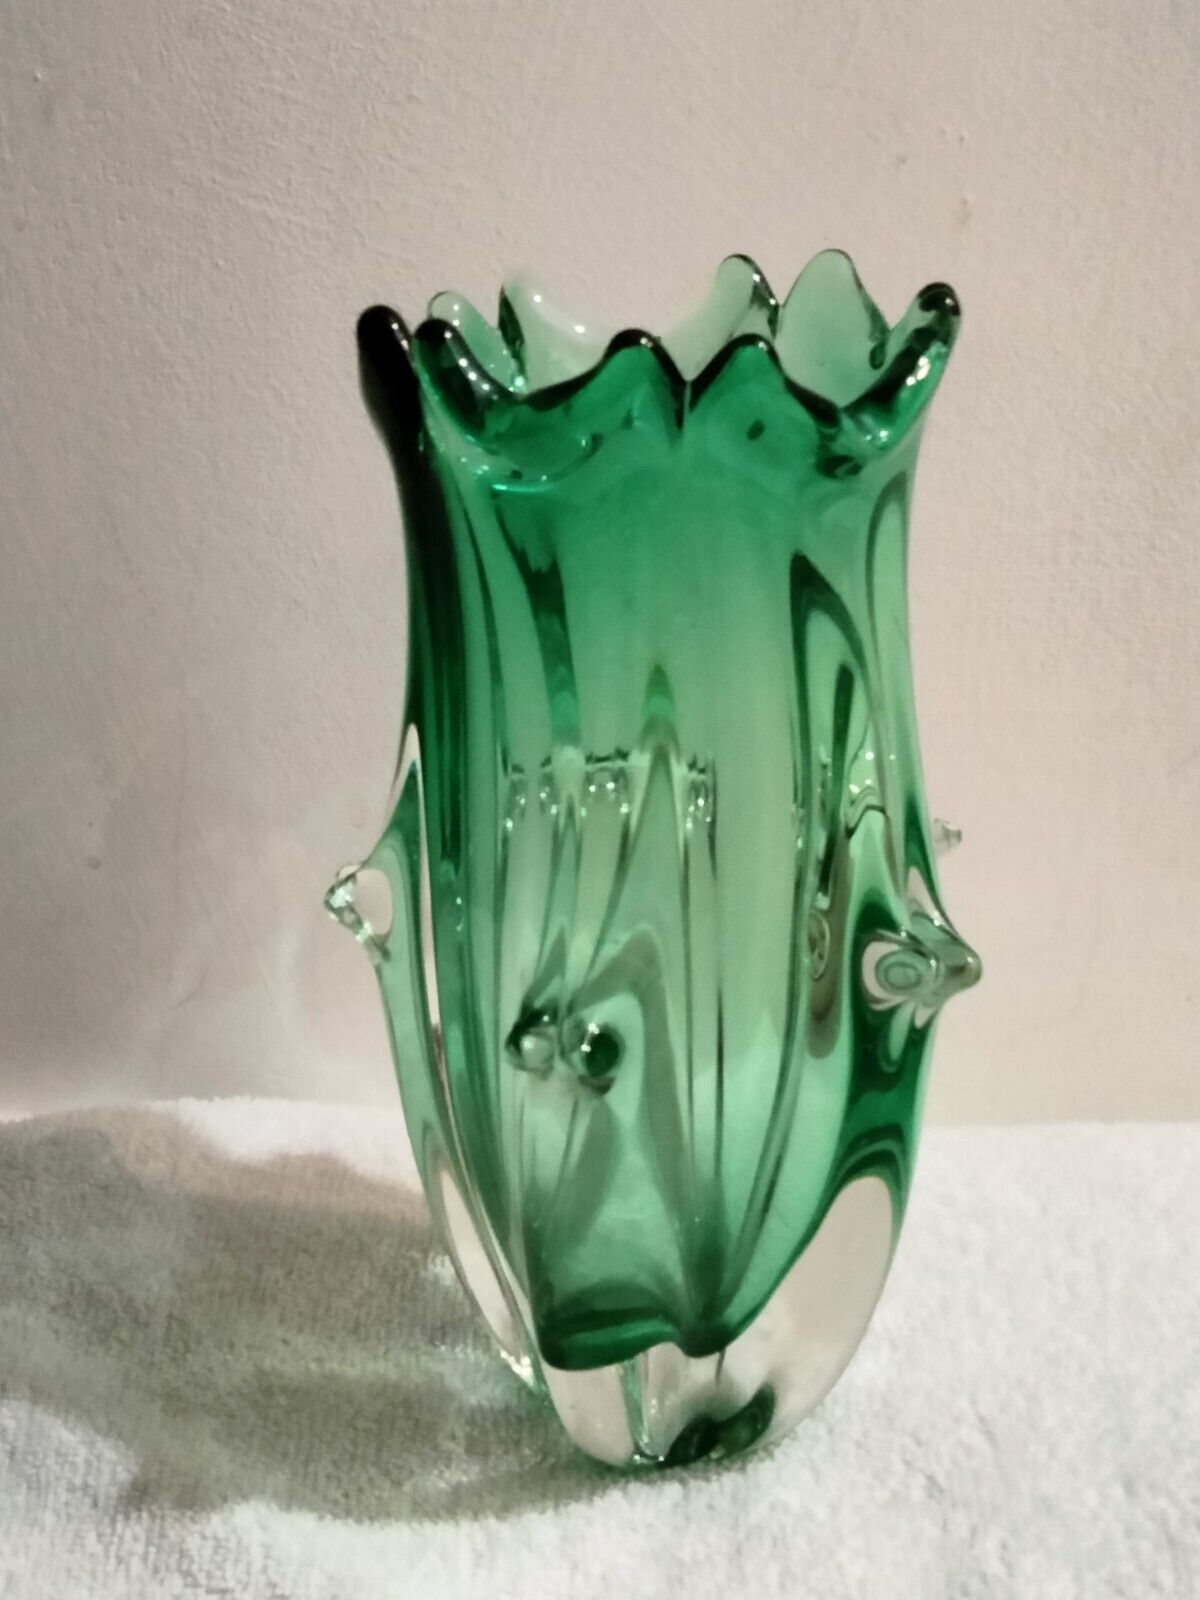 New Unique Sculpted Sommeroso Style Vase Clear Glass Encases The Green Glass